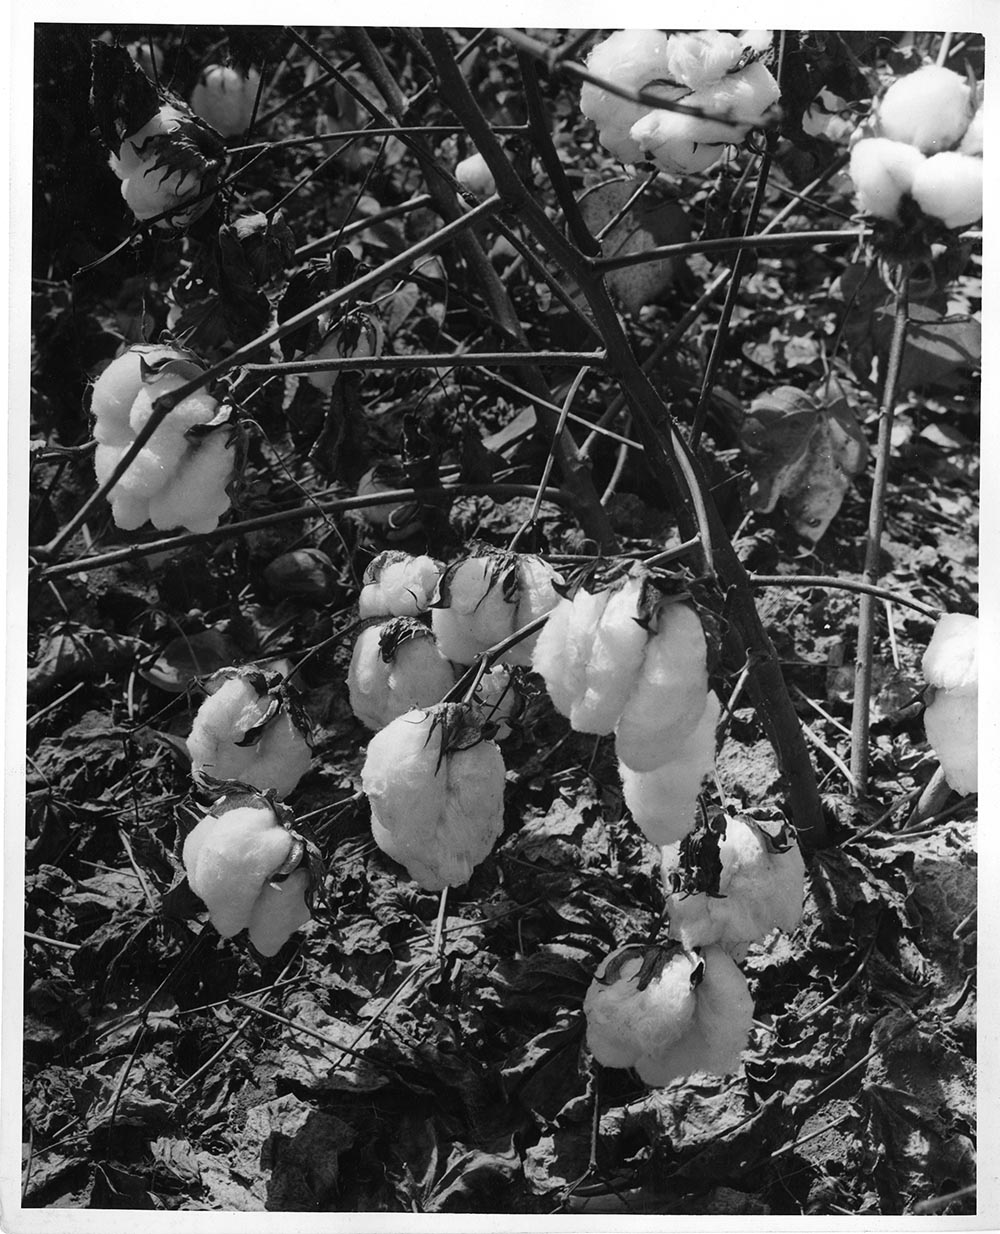 Cotton on the stalk grown in the fertile Mississippi Valley lowland near Memphis